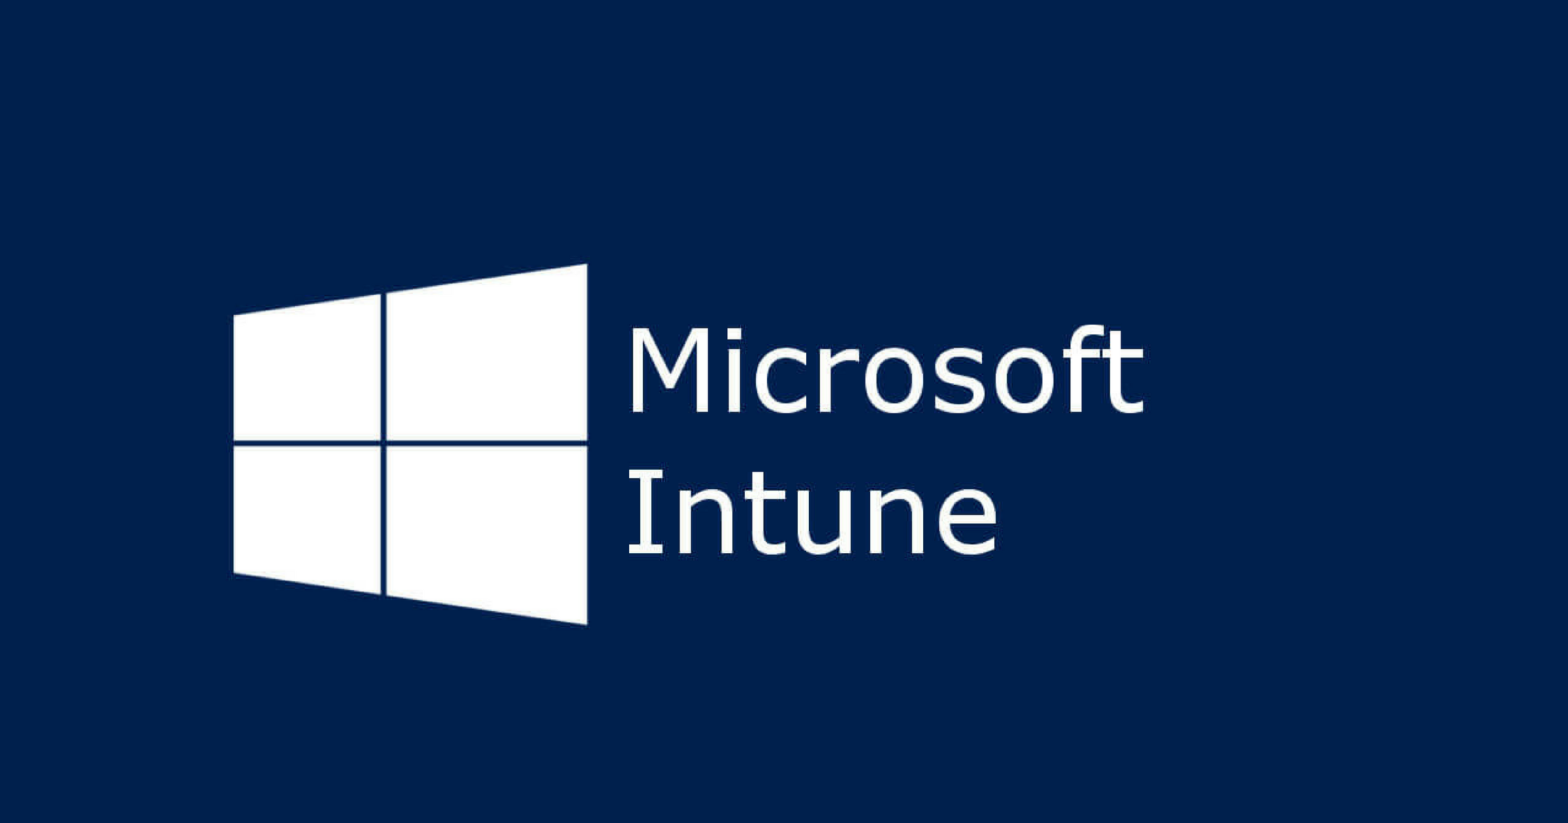 Deploying Wi-Fi profile connection using Intune